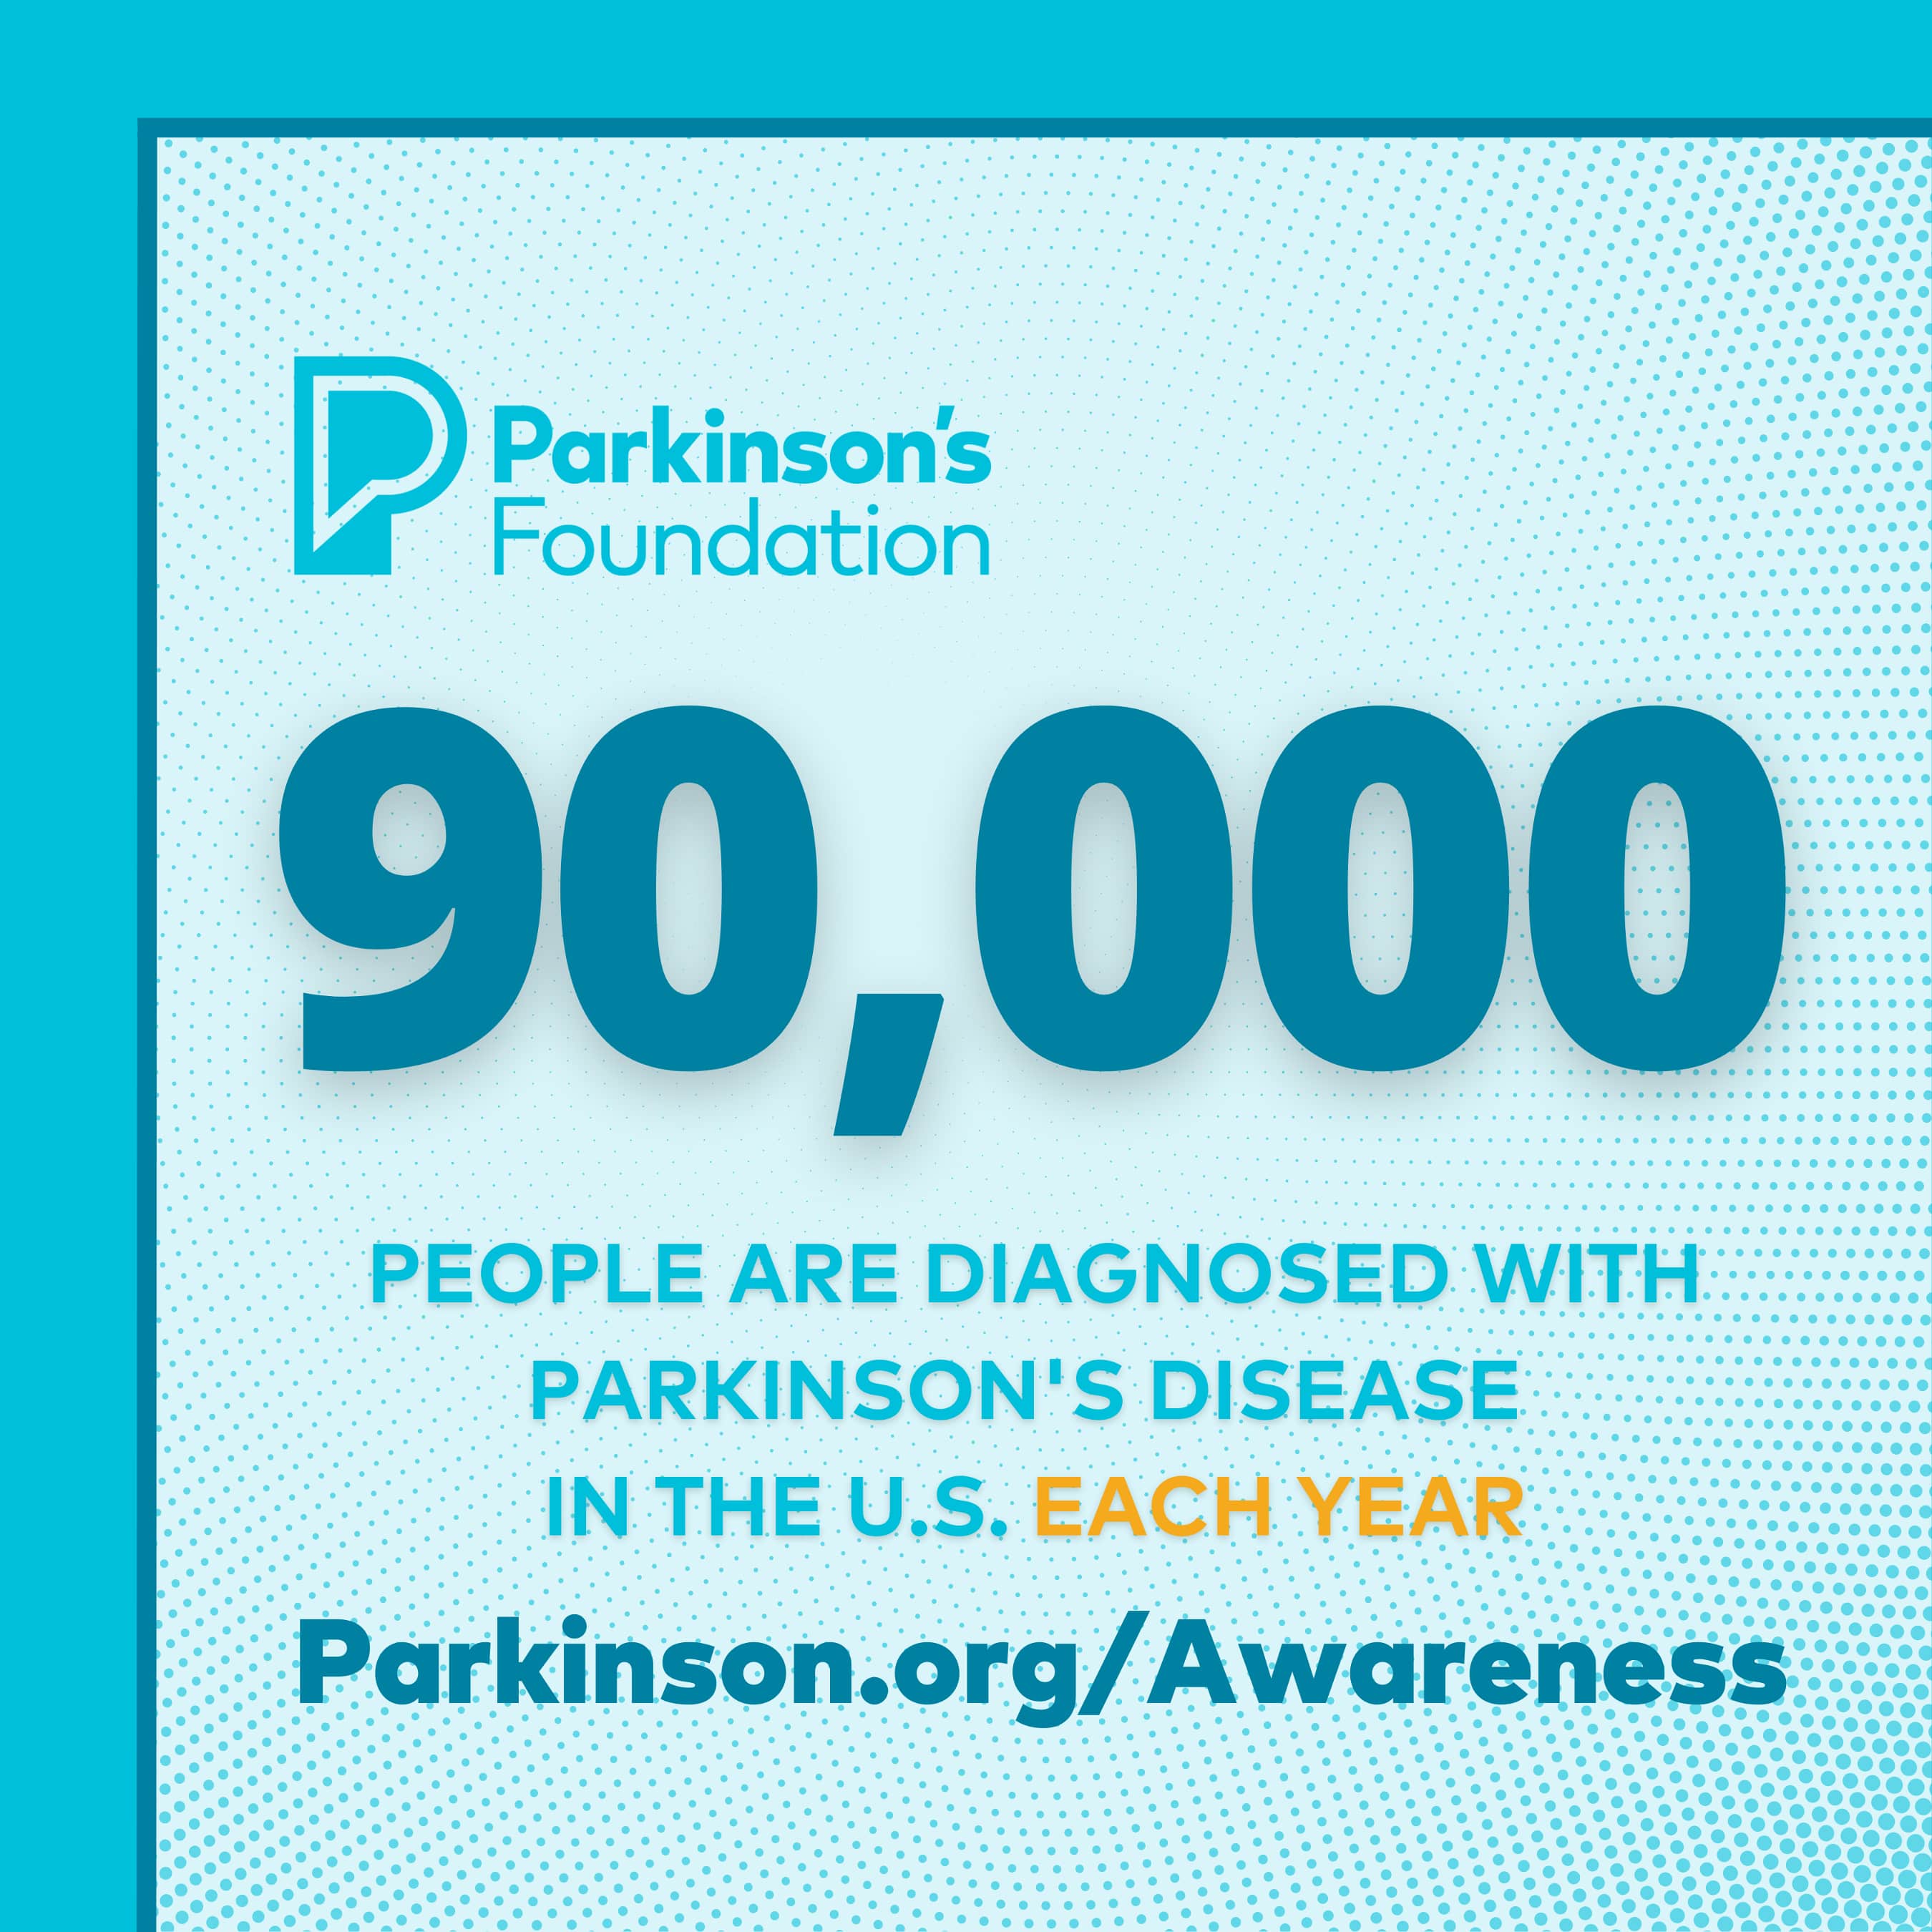 Nearly 90,000 people are diagnosed with Parkinson’s disease in the U.S. annually, according to a recent Parkinson’s Foundation-backed study.